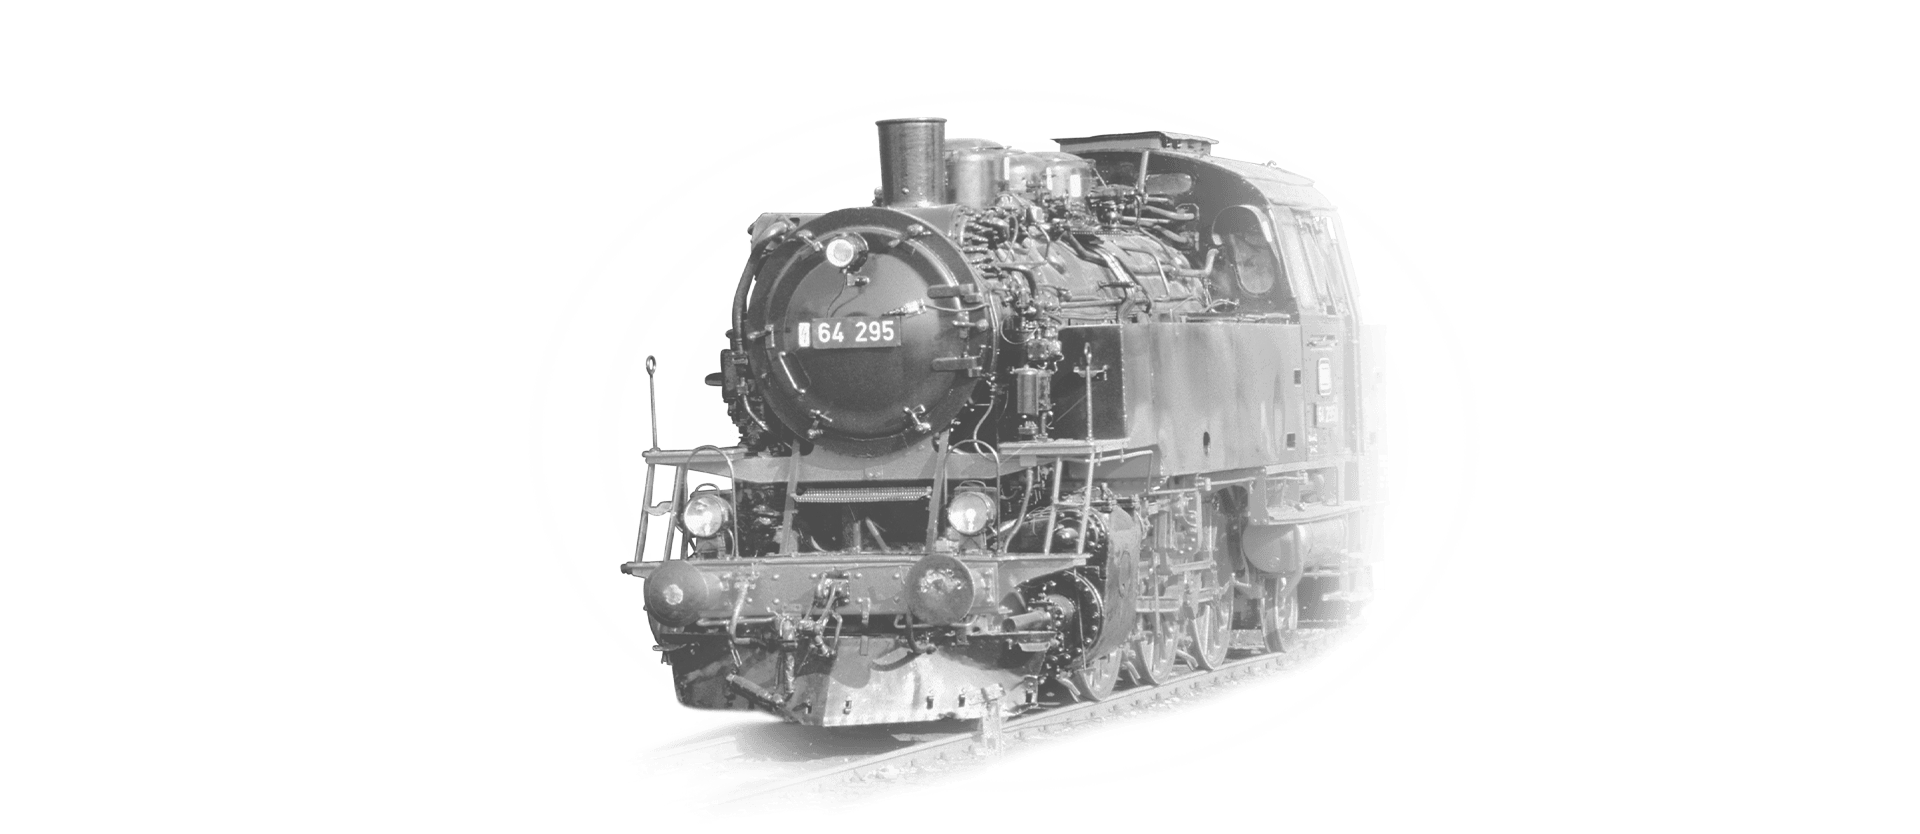 The locomotive 64-295 is coming towards the camera in black and white